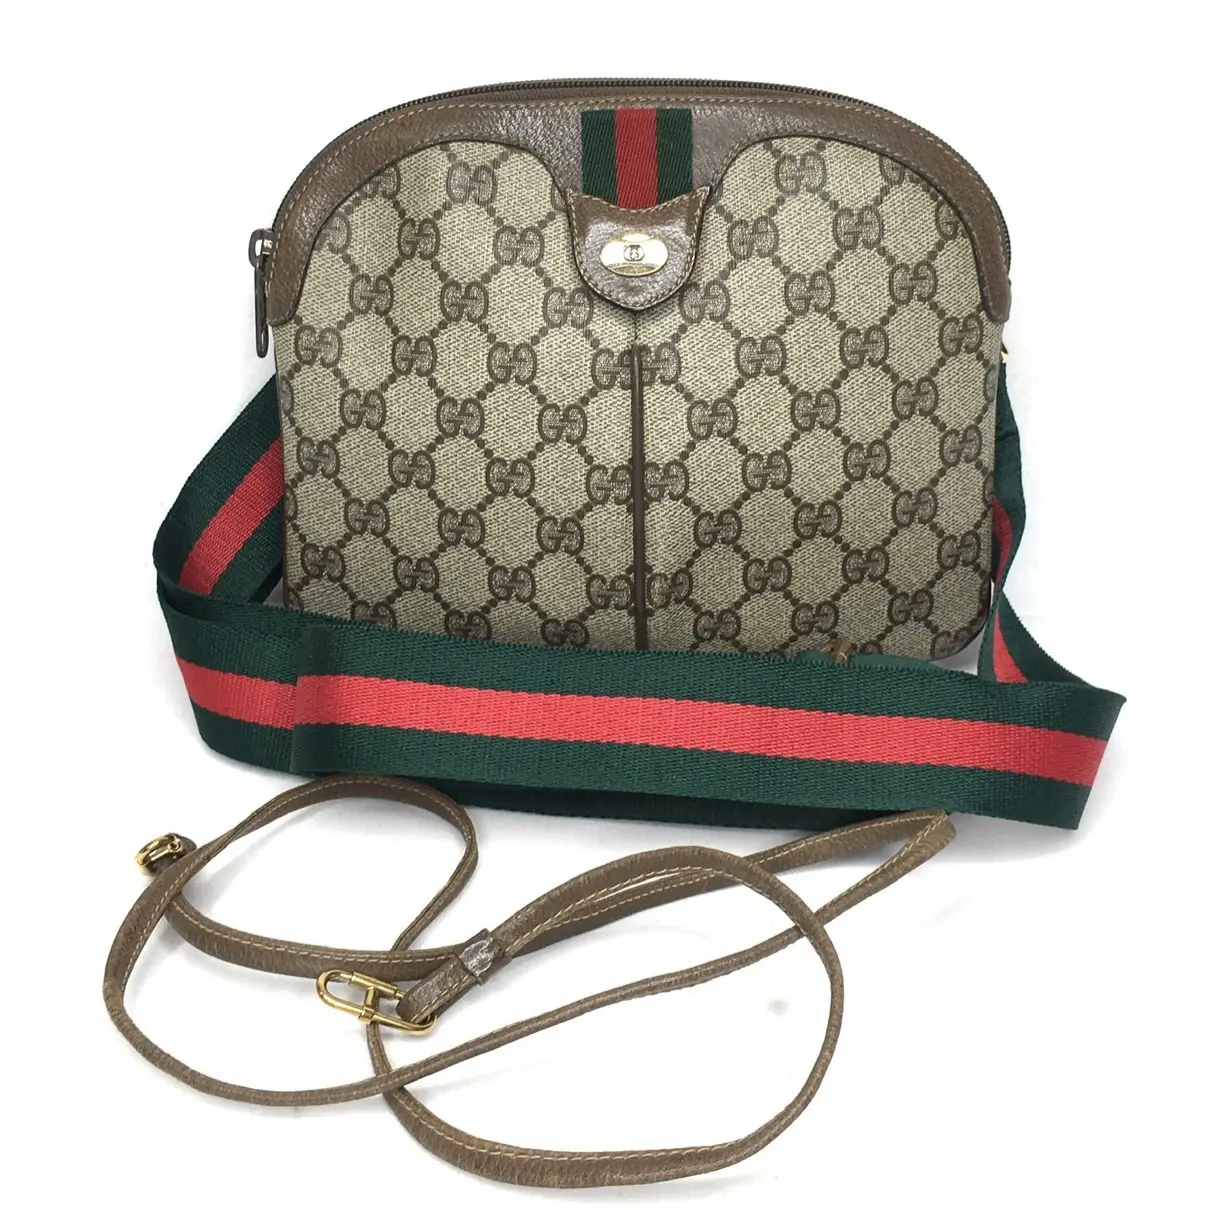 Patent leather crossbody bag Gucci